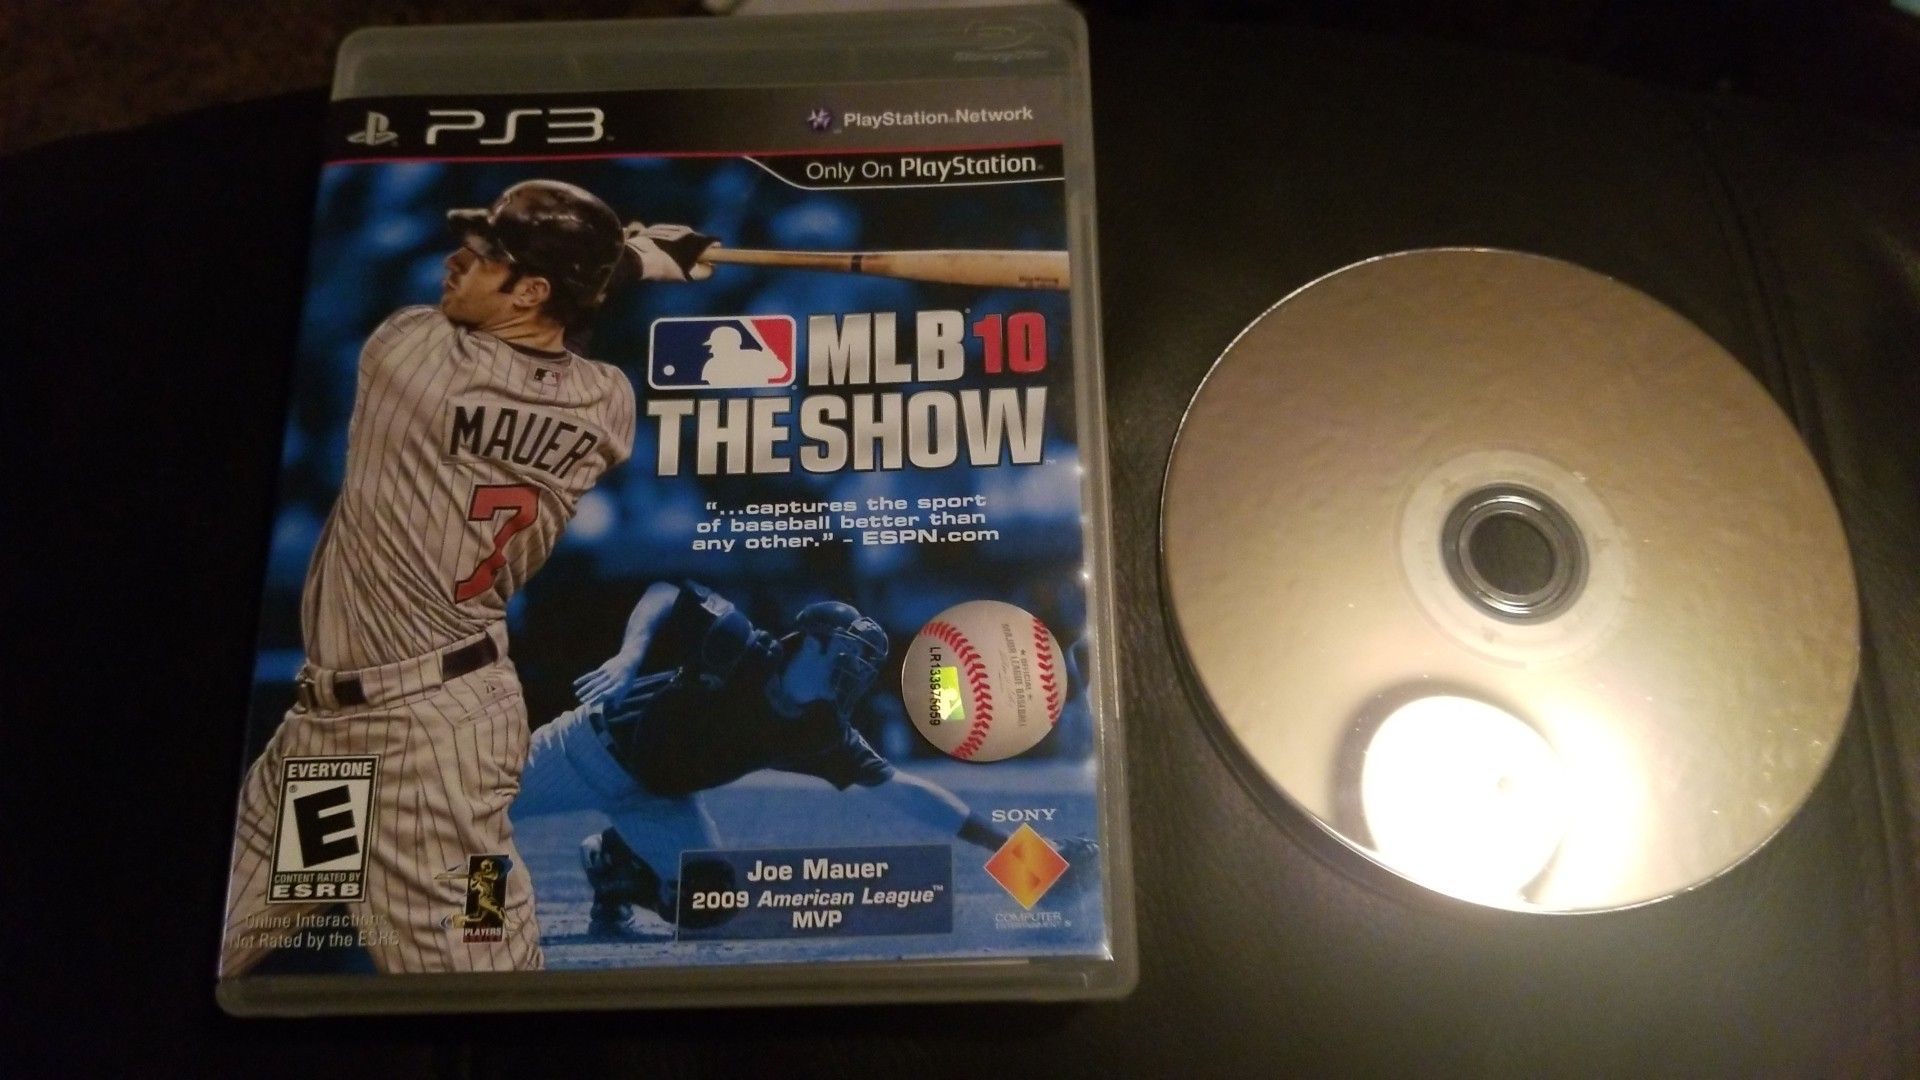 PS3 MLB 10 the show